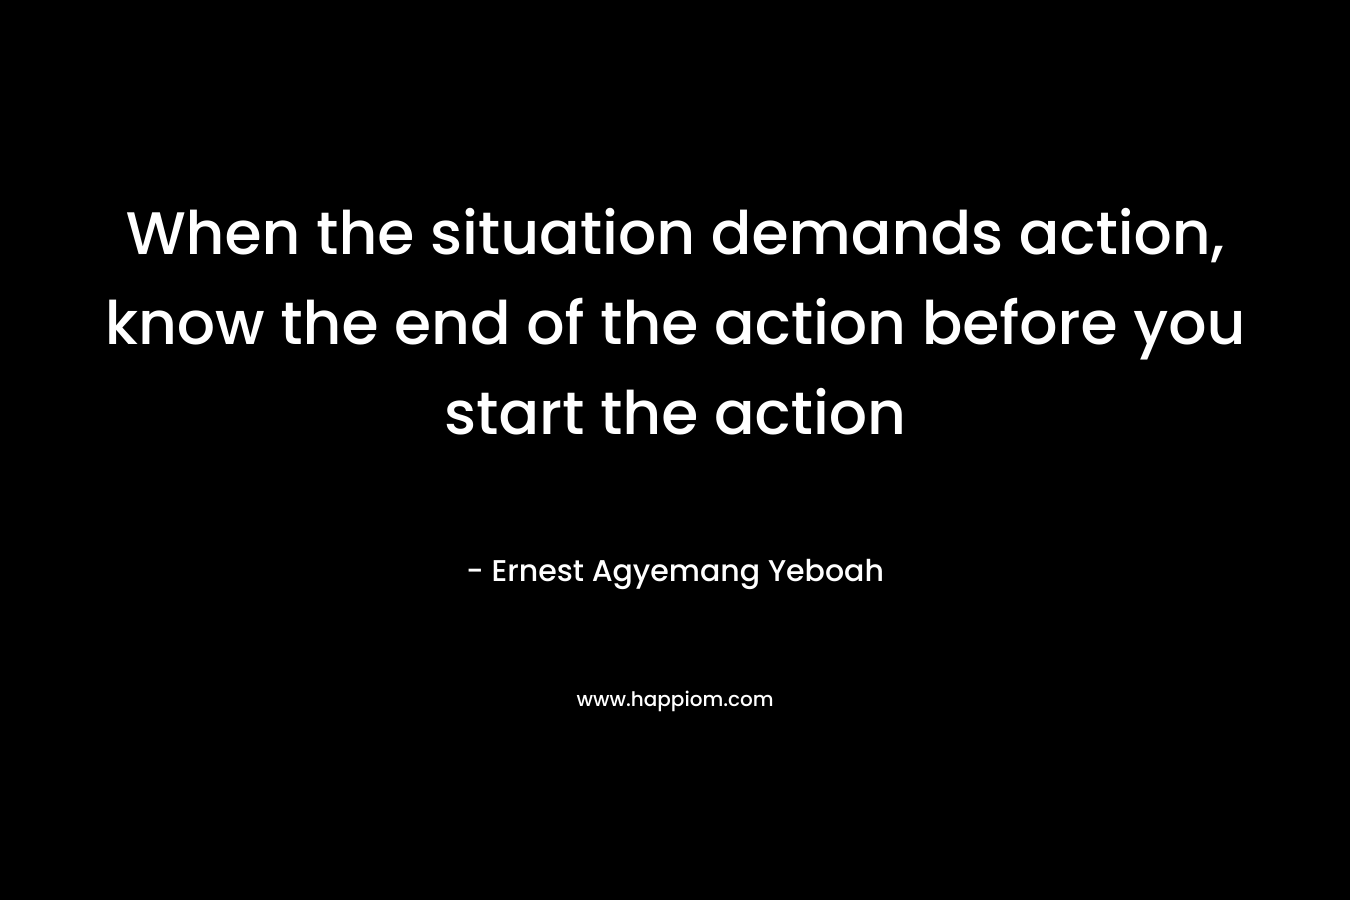 When the situation demands action, know the end of the action before you start the action